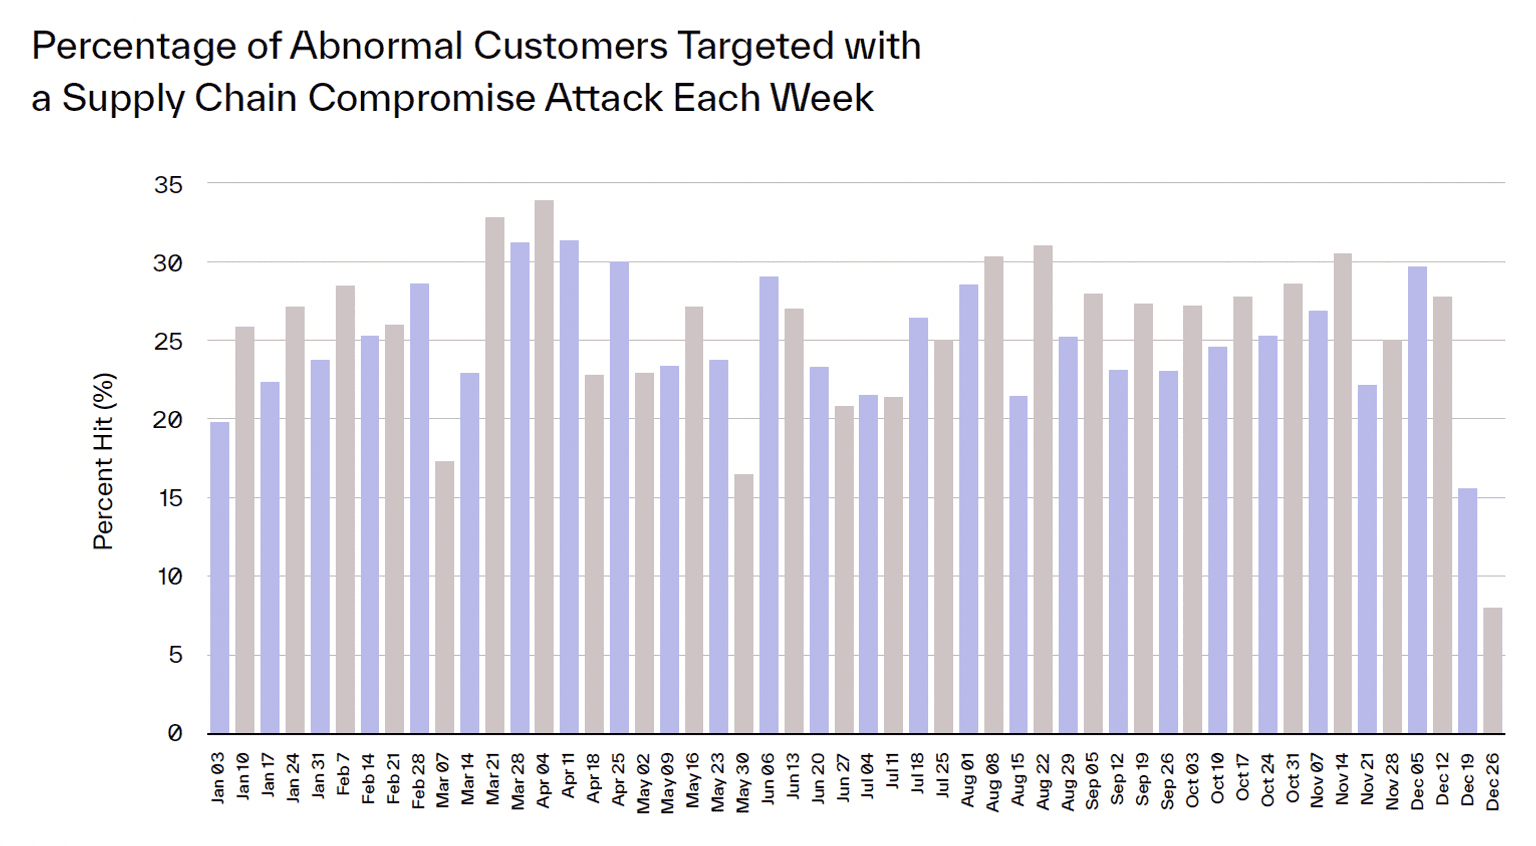 Percentage of Customers Targeted with supply chain compromise Each Week